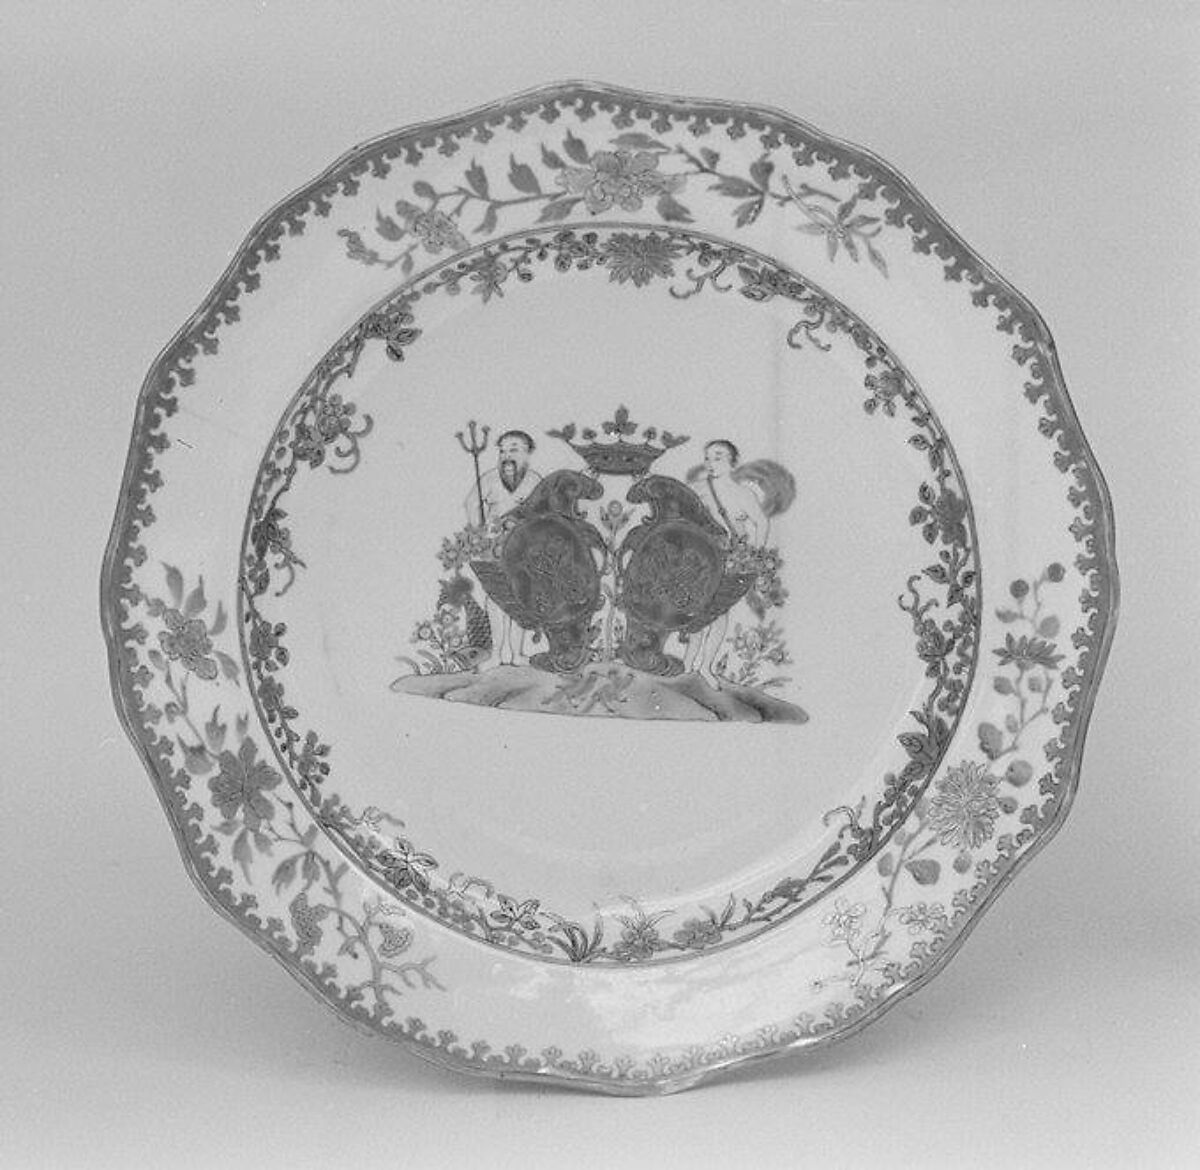 Dinner plate (part of a service), Hard-paste porcelain, Chinese, for Danish market 